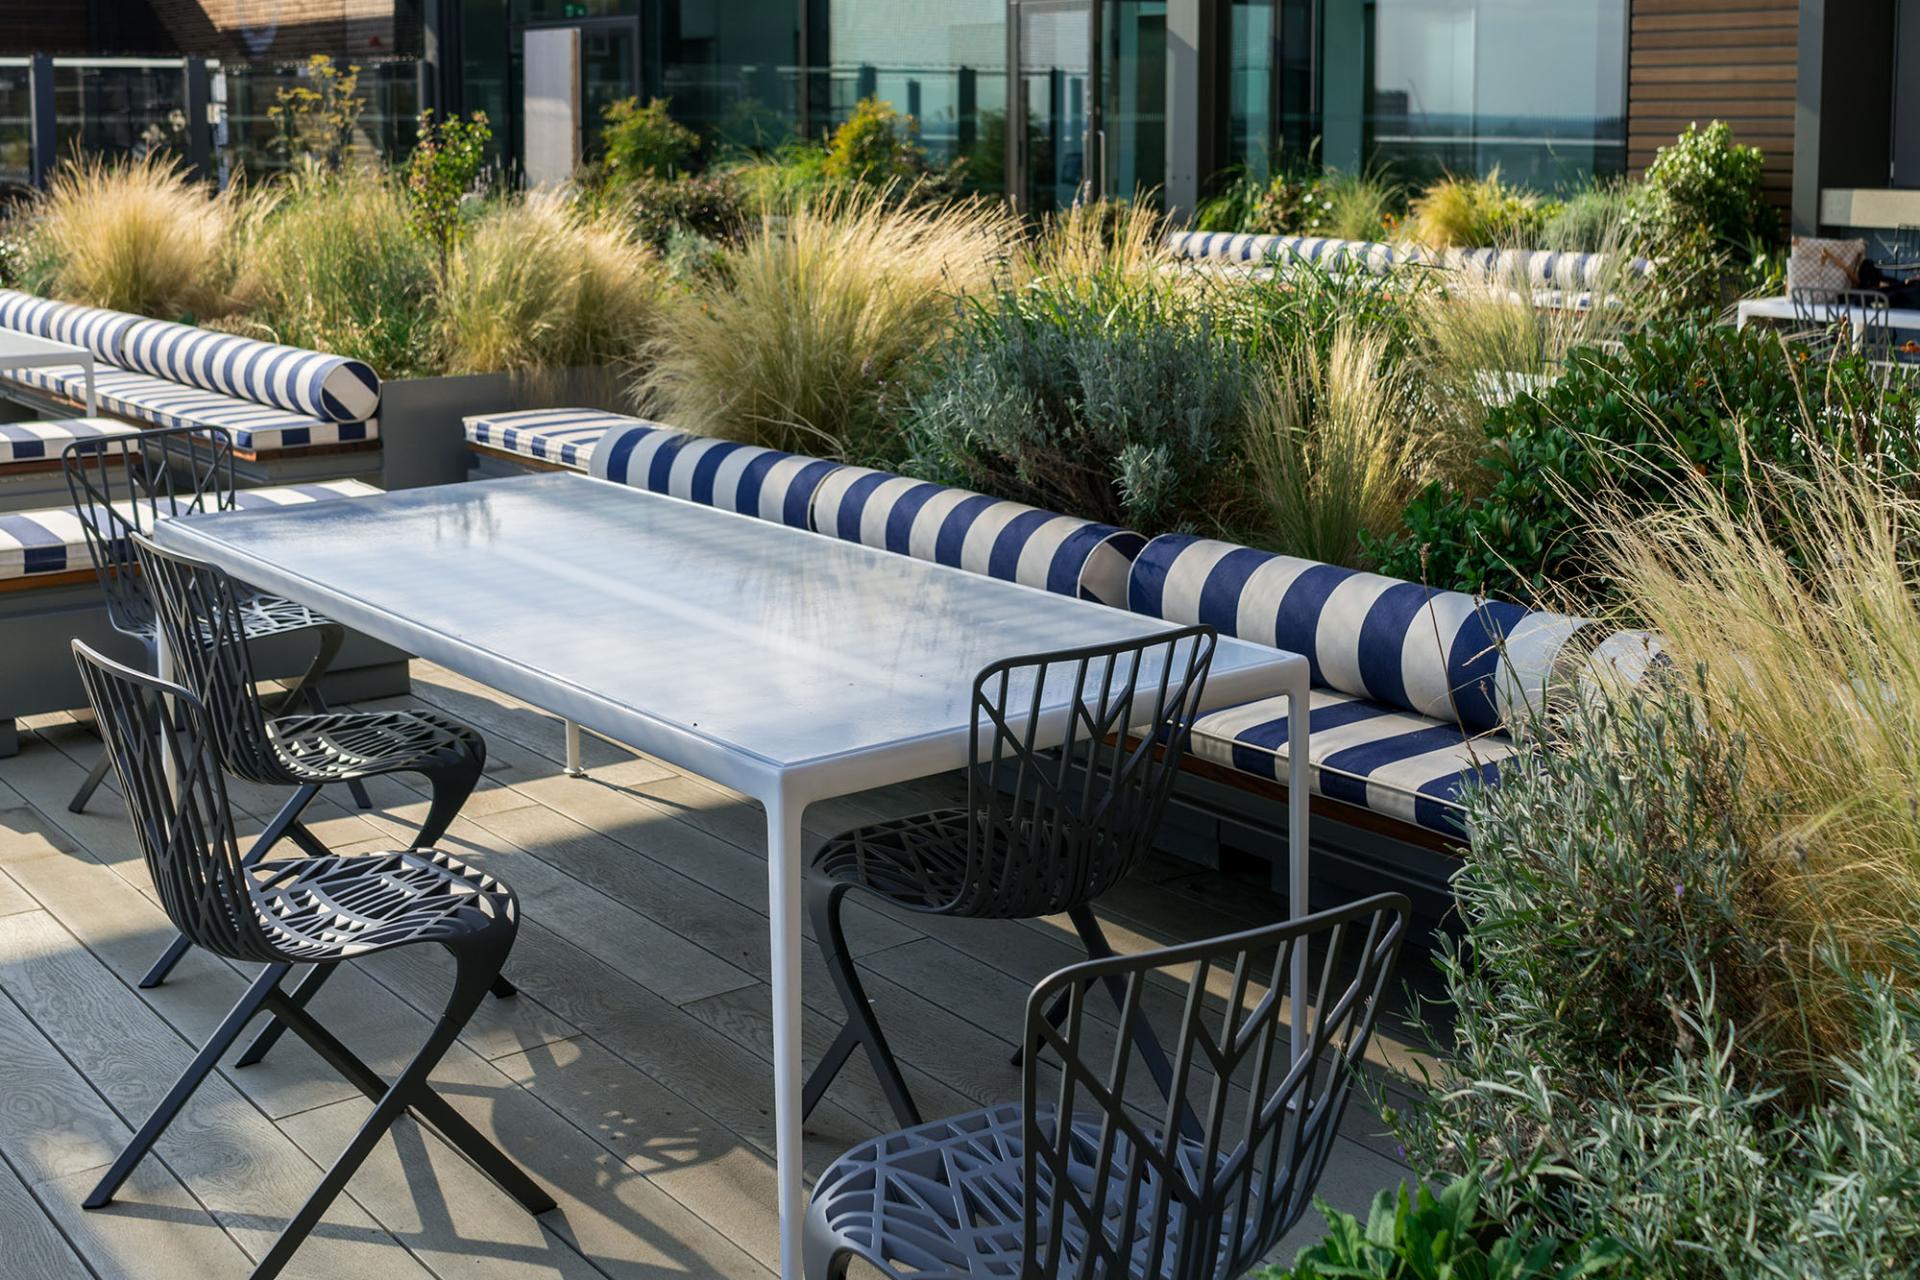 Rooftop patio at the Vertex Pharmaceuticals international headquarters in London